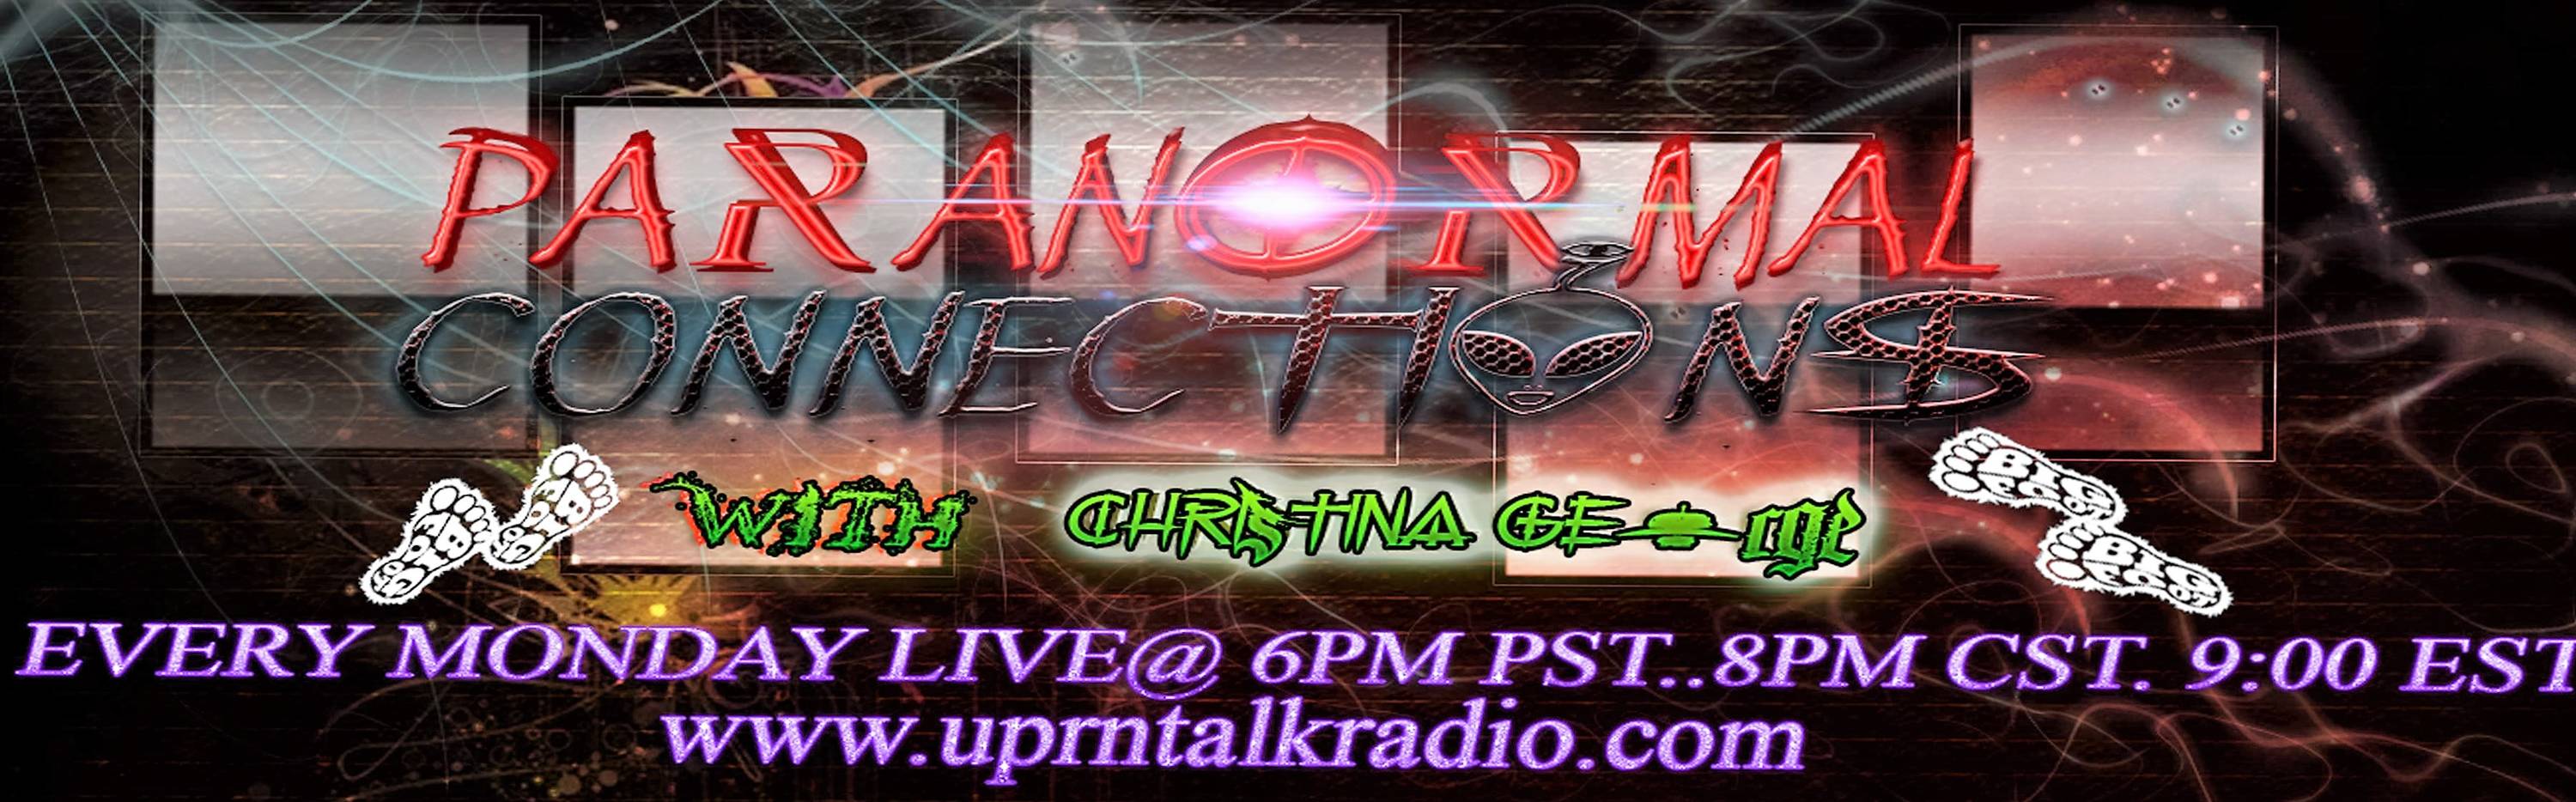 Paranormal Connections Radio Show Oct 16 2017 Napa Valley Wildfires & Haunted House Tours 